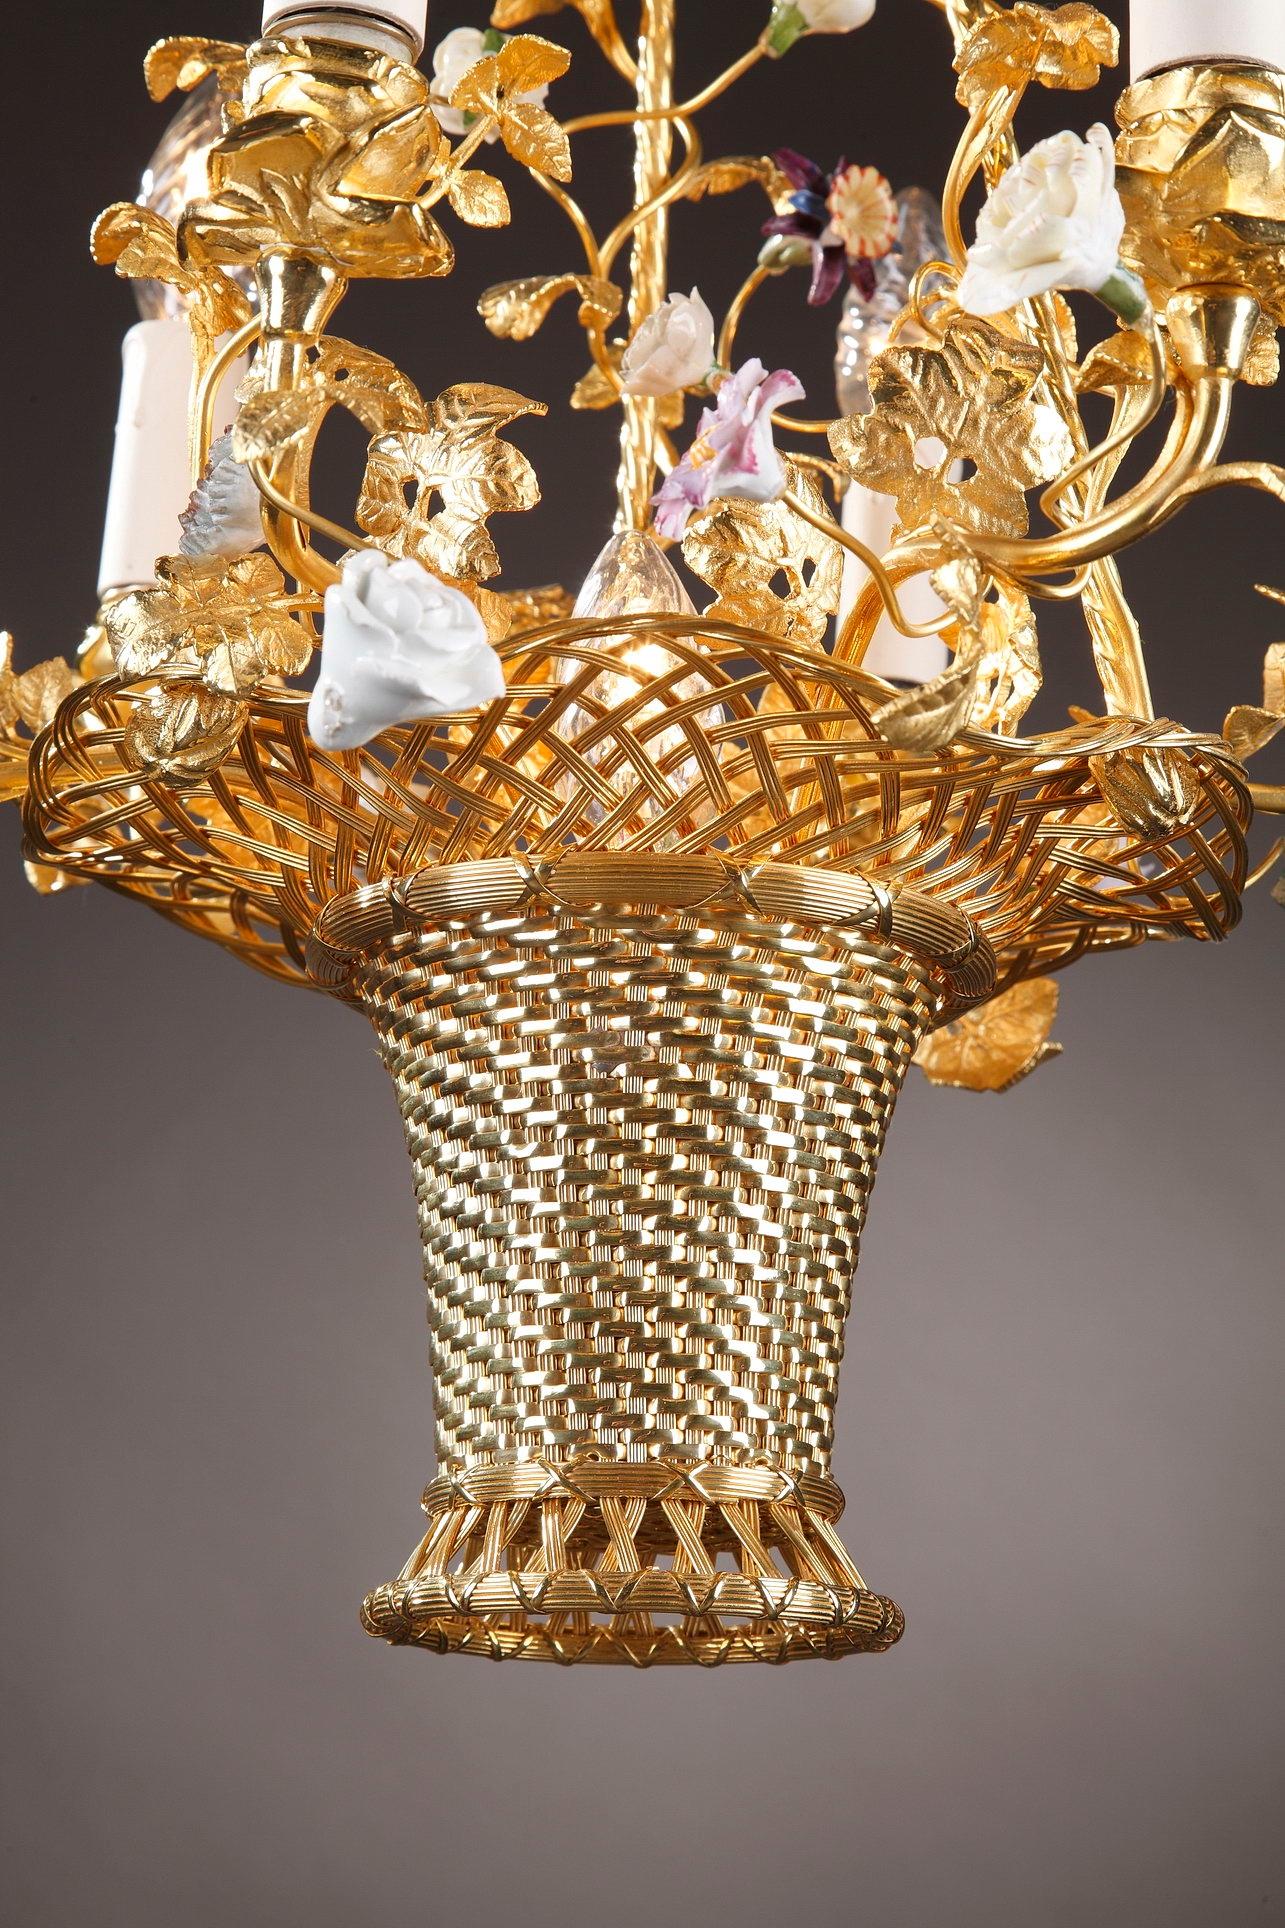 Exquisite 19th century ormolu basket-shaped chandelier with 7-light. The arms of light coil out from an over-flowing basket of flowers, crafted of porcelain in Meissen taste. The stunning symphony of flowers embellish this Rococo-style chandelier.